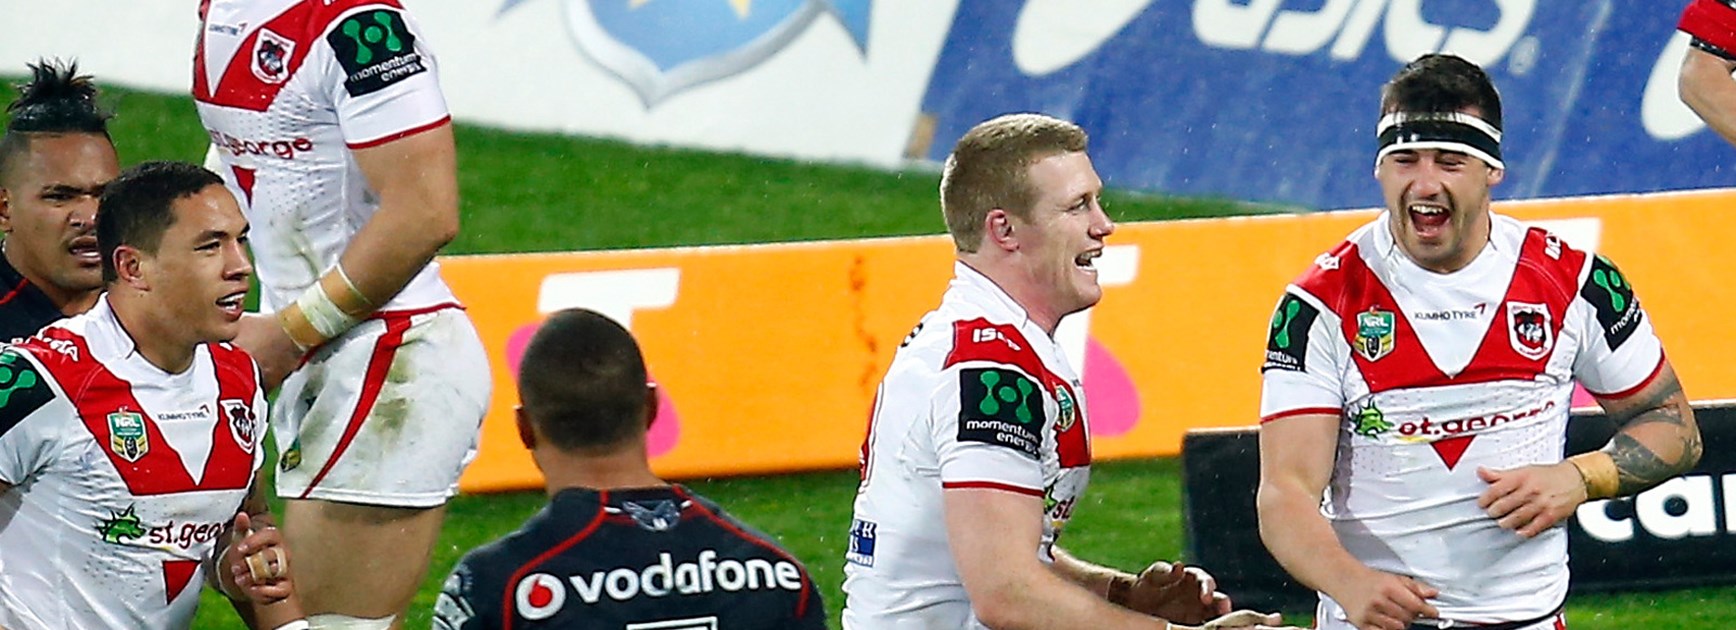 Jake Marketo scored a spectacular try against the Warriors last weekend, his first since returning to the Dragons.